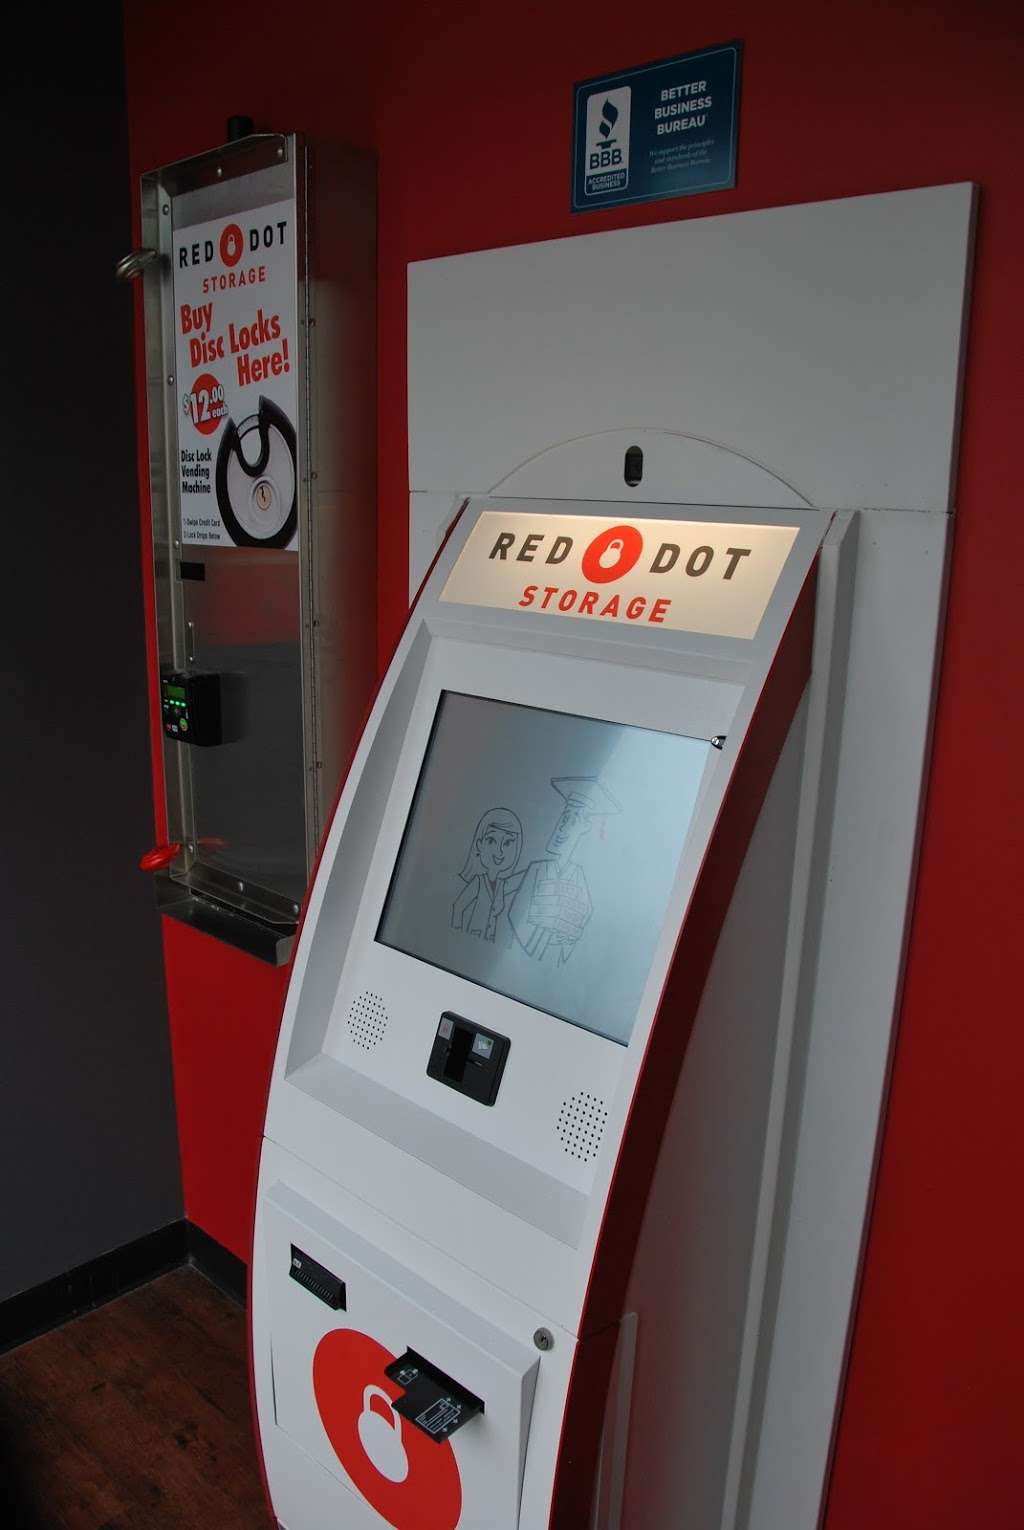 Red Dot Storage | #7, 284 Main St, Antioch, IL 60002 | Phone: (847) 233-1788